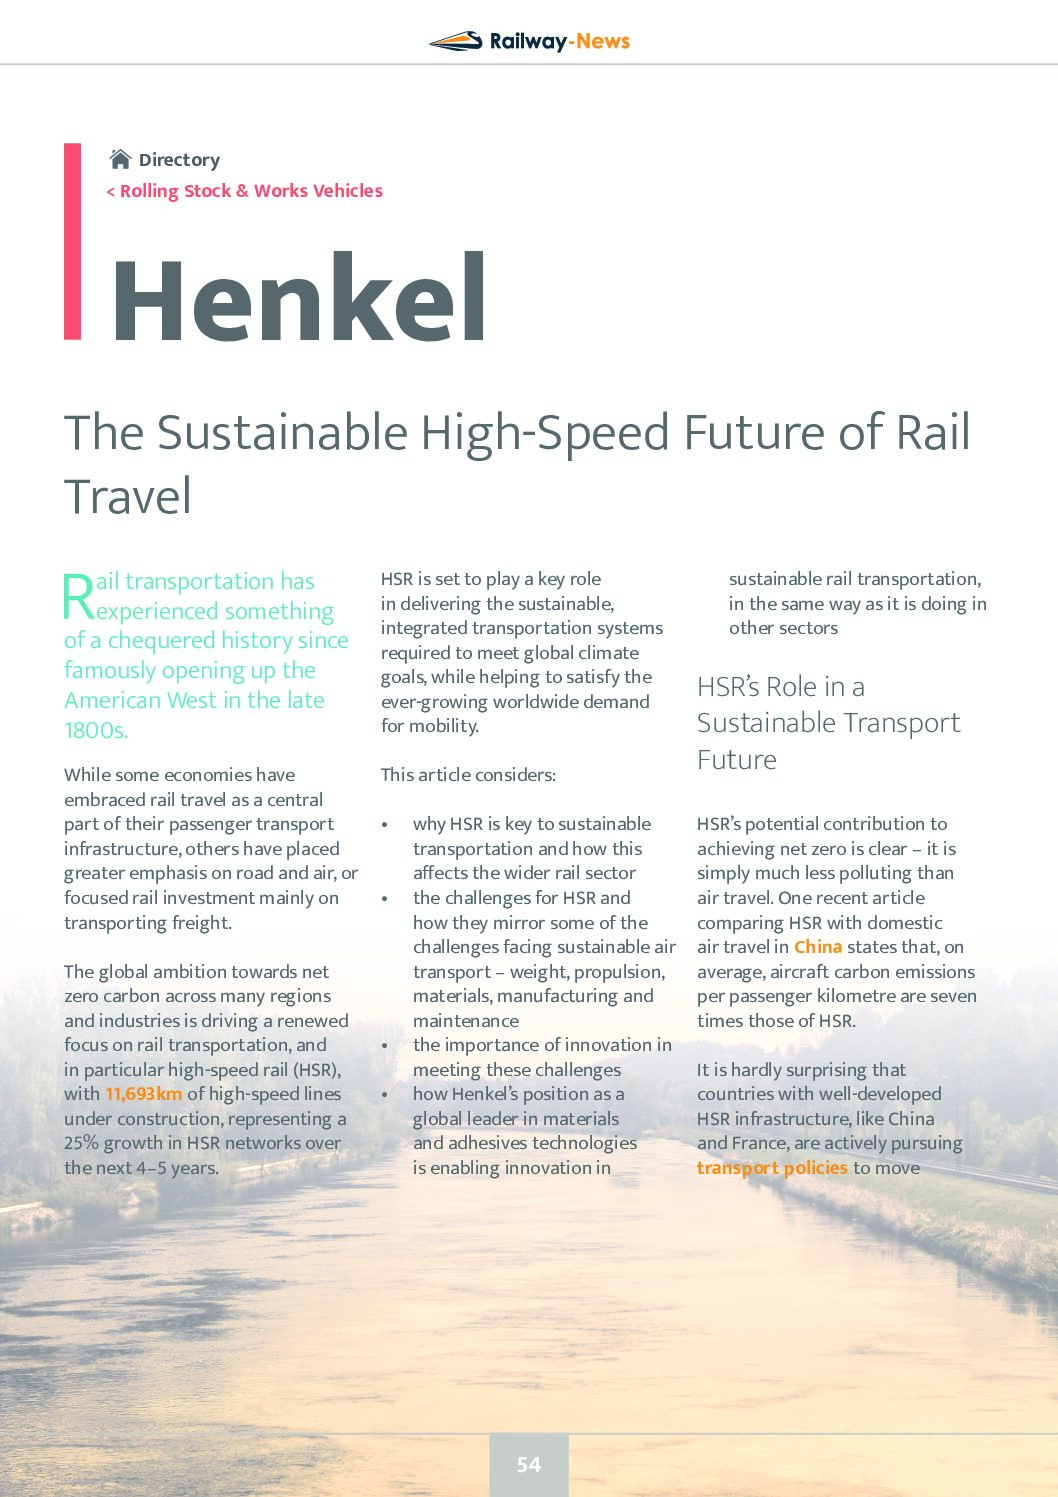 The Sustainable High-Speed Future of Rail Travel